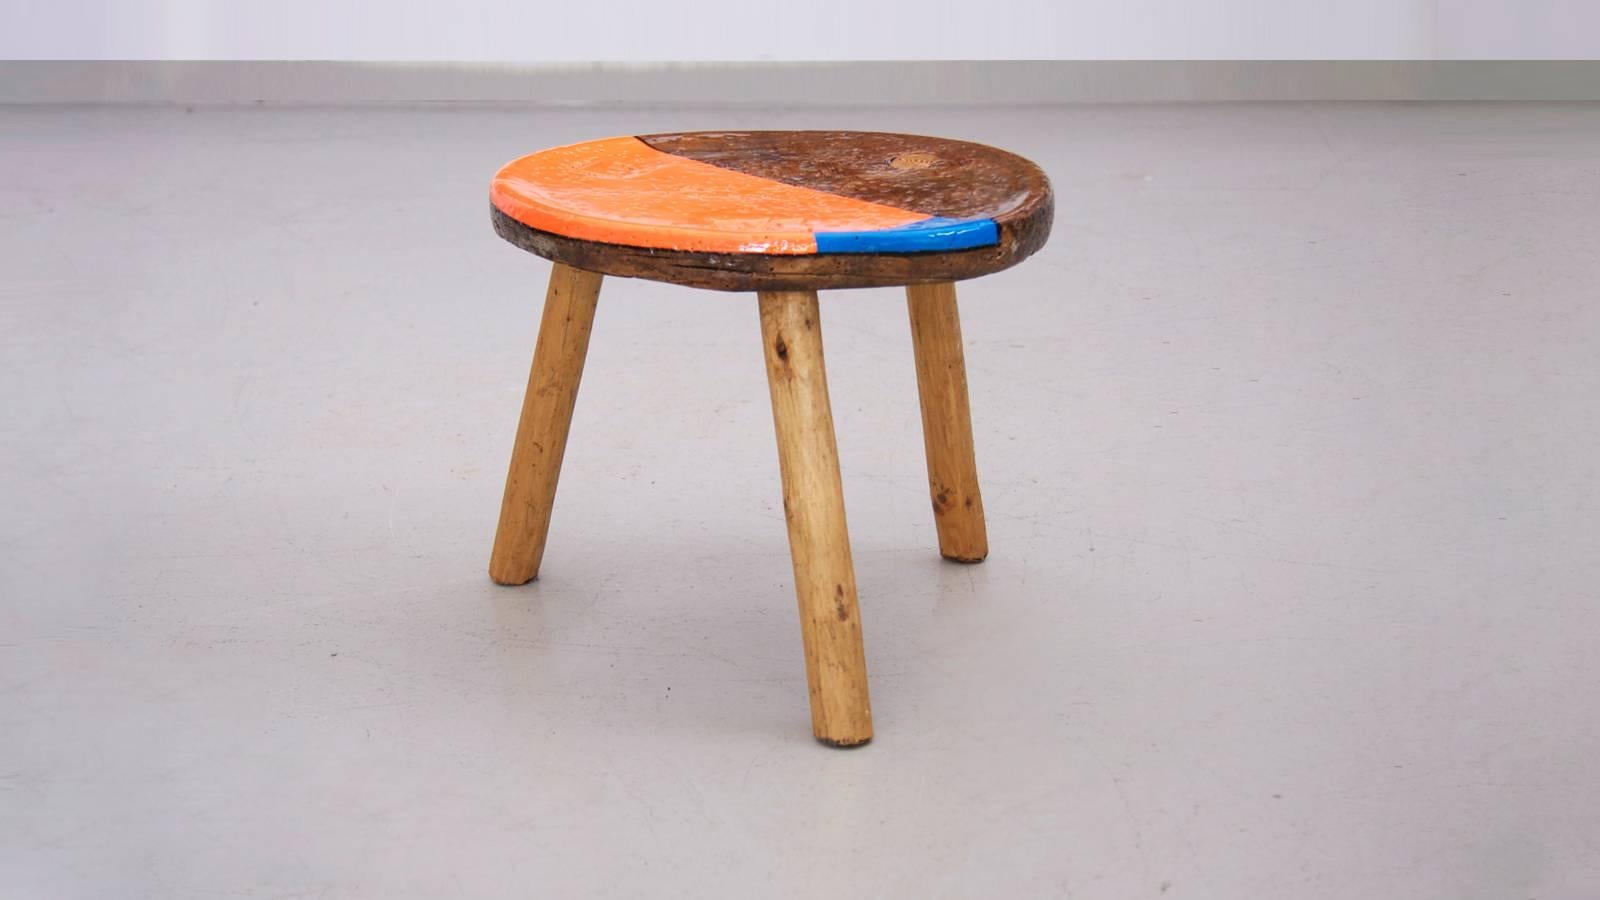 Markus Friedrich Staab Sans Titre stool in his Classic neon colors and very thick 2K clearcoat.